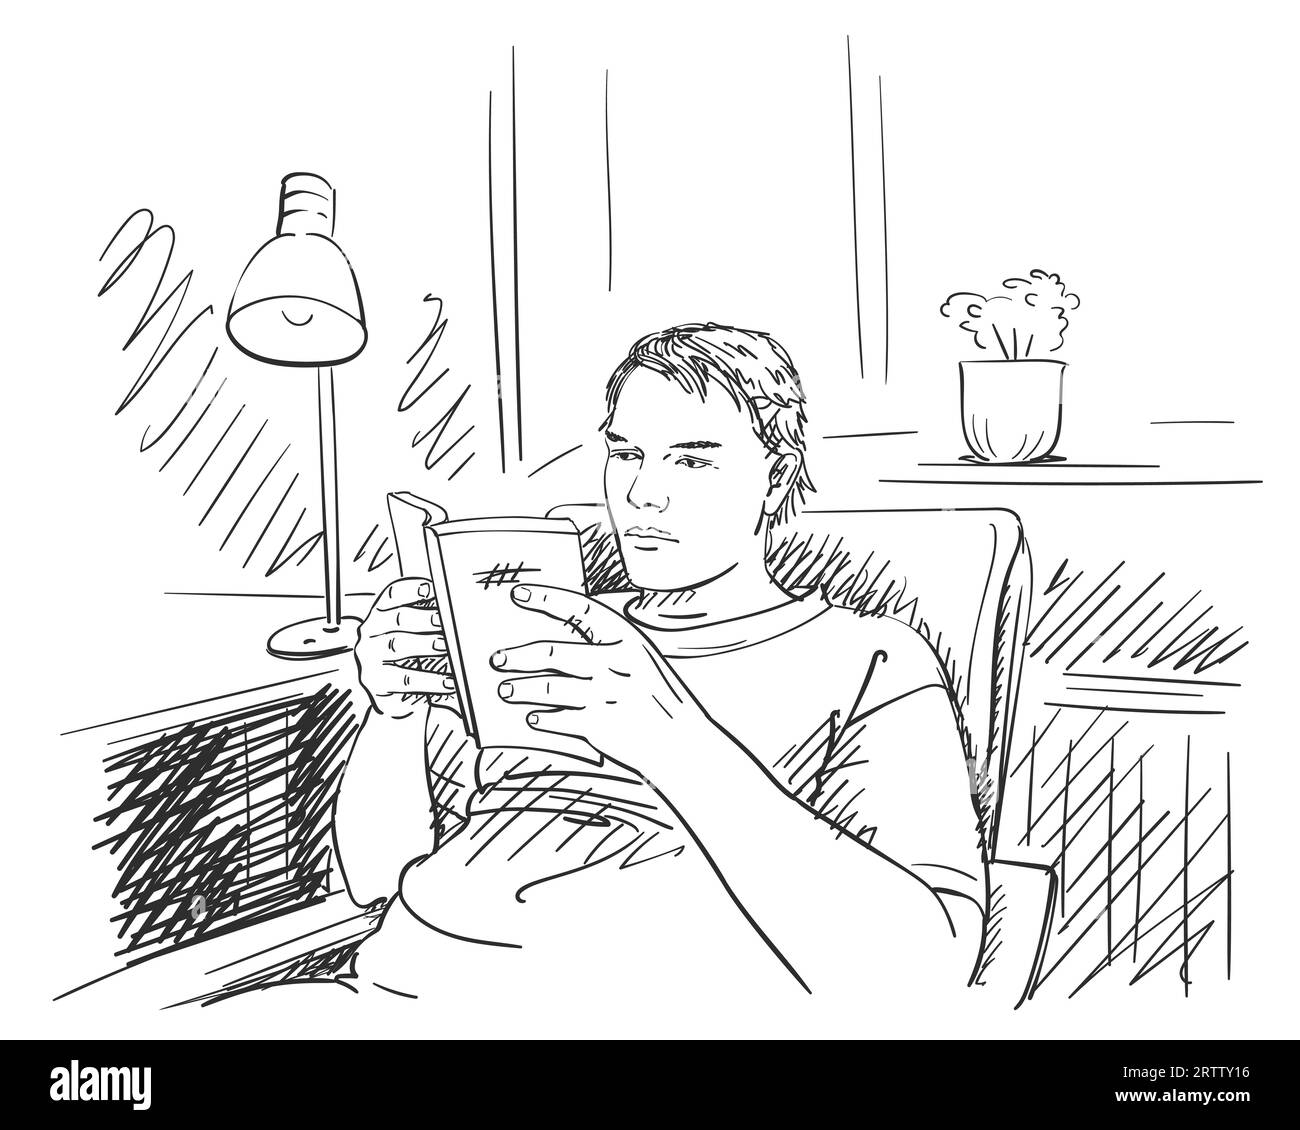 Sketch of man reading book in comfortable home atmosphere, Hand drawn vector illustration with hatched shades Stock Vector